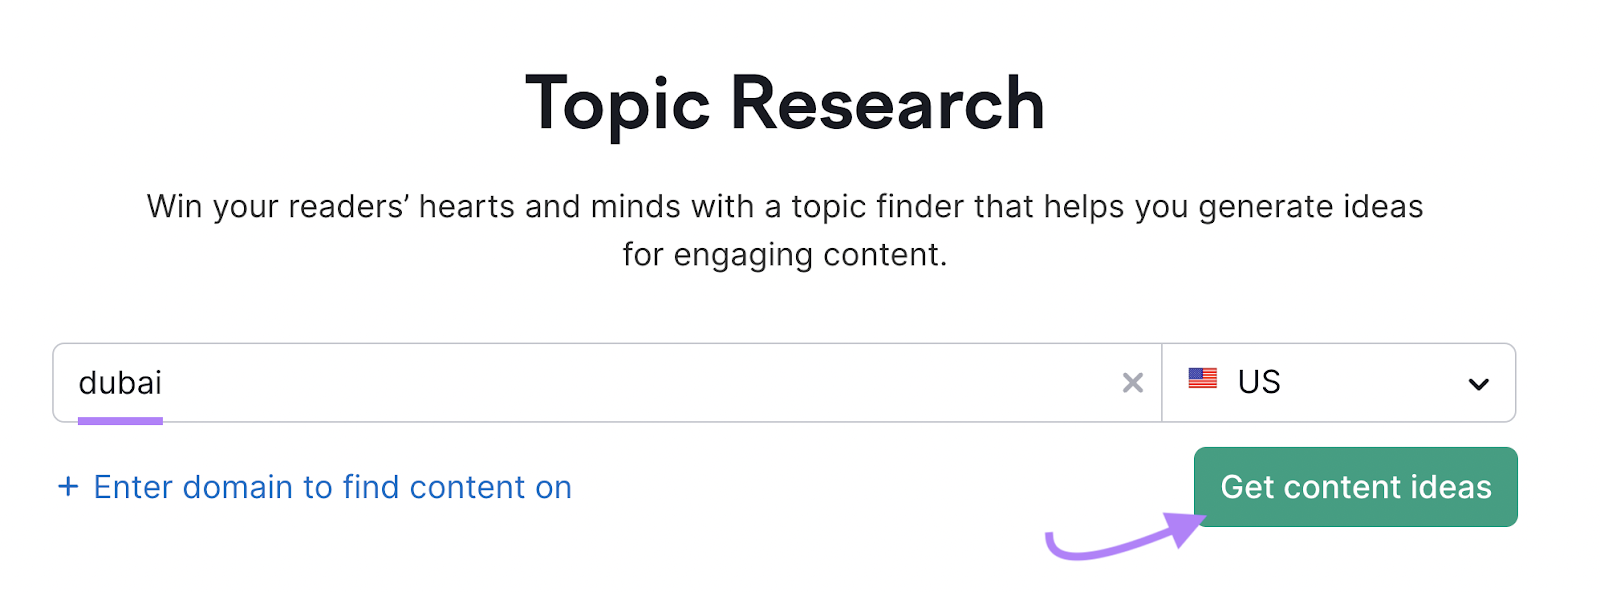 Topic research tool by Semrush with 'dubai' entered into the search bar and 'Get content ideas' button highlighted